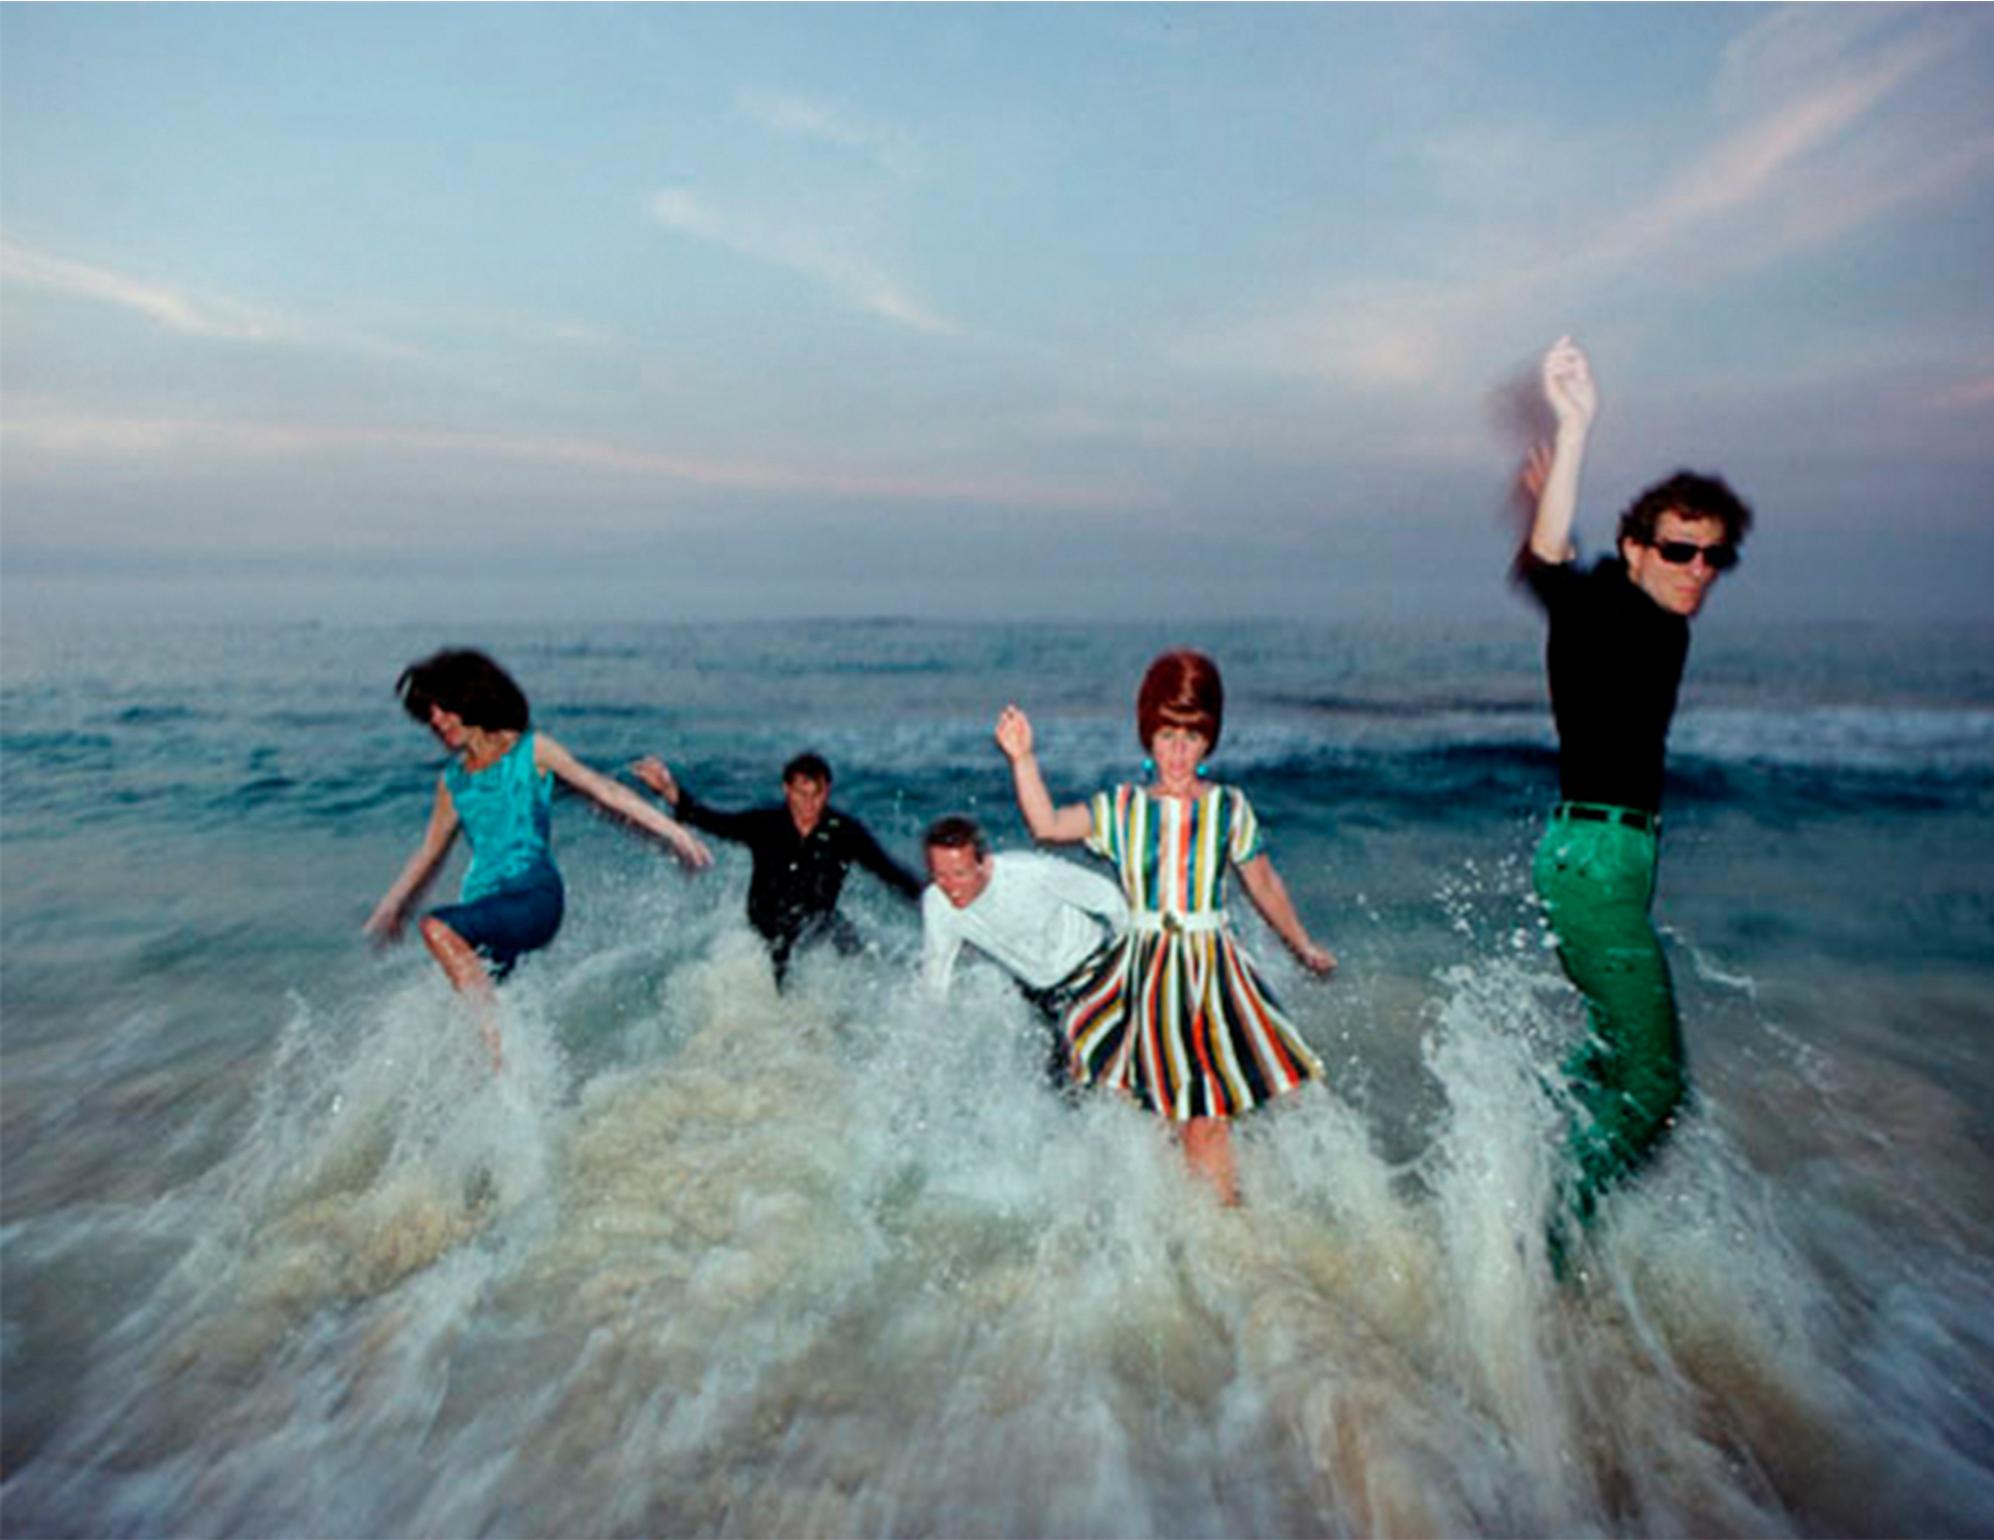 Signed limited edition 20x24"" print of The B-52s by Lynn Goldsmith, shot in 1980.

Limited edition number 3/20

Modern C-type print. Available for immediate shipping.

Lynn Goldsmith has documented over five decades of American culture, capturing